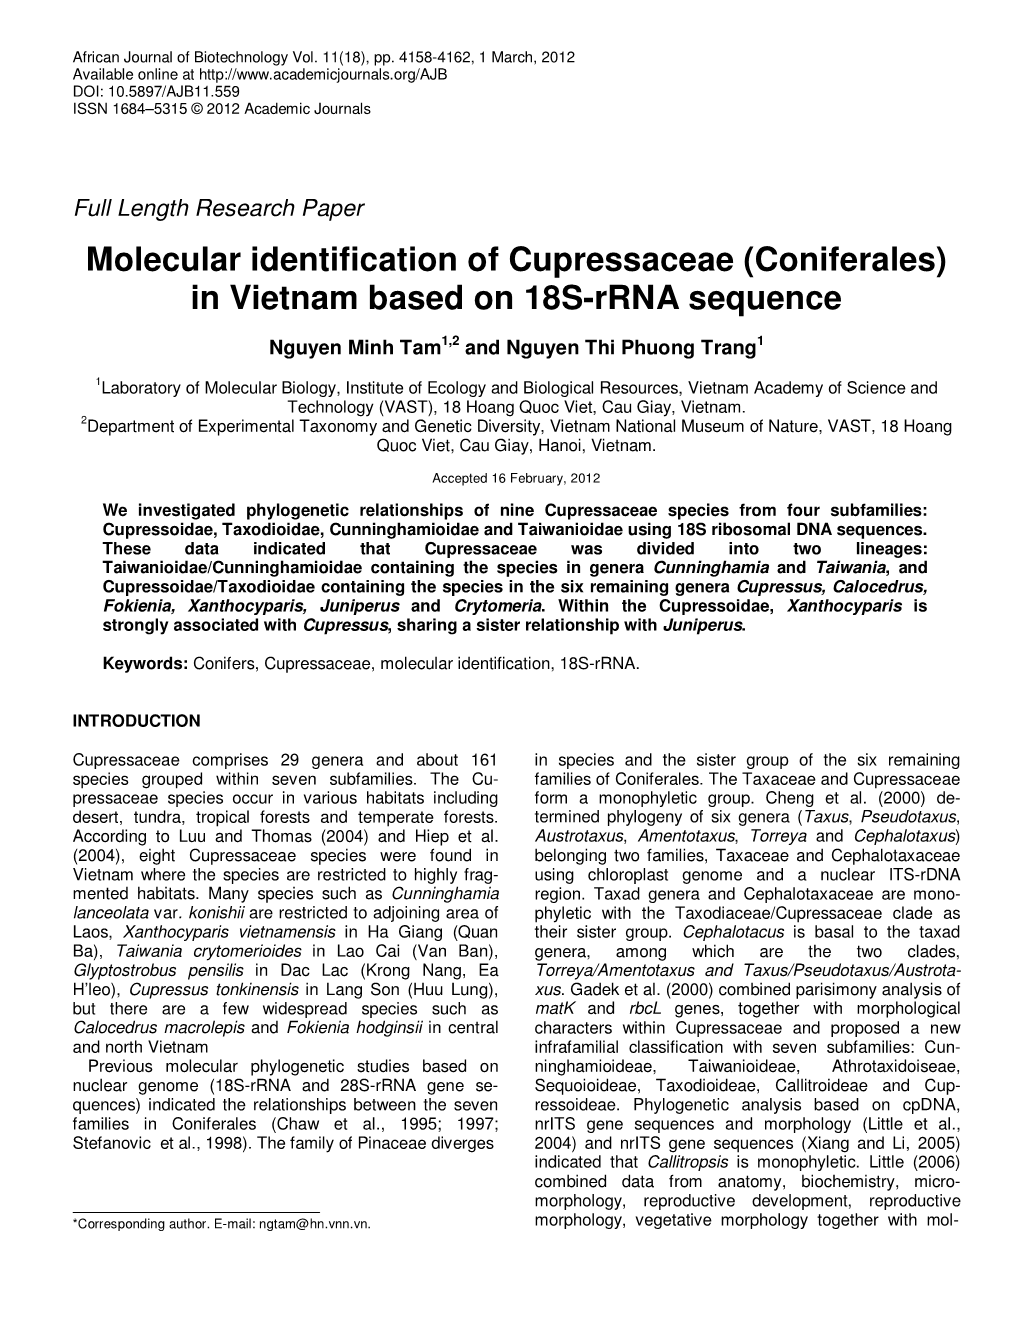 Molecular Identification of Cupressaceae (Coniferales) in Vietnam Based on 18S-Rrna Sequence